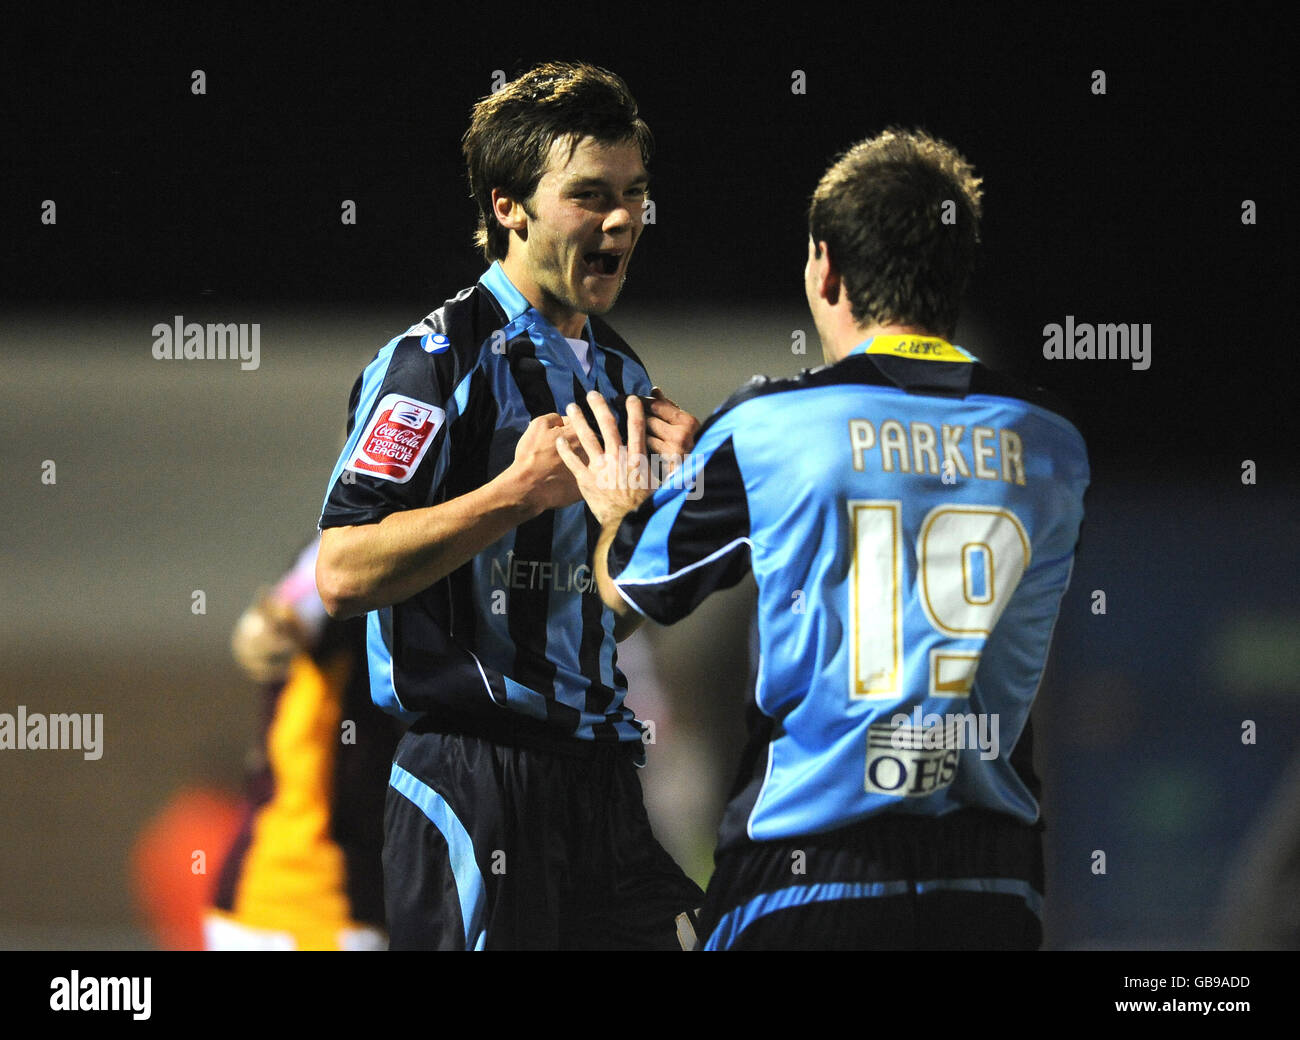 Soccer - FA Cup - First Round Replay - Northampton Town v Leeds United - Sixfields Stadium. Leeds United's Jonathan Howson celebrates with Ben Parker after scoring their second goal against Northampton Town Stock Photo